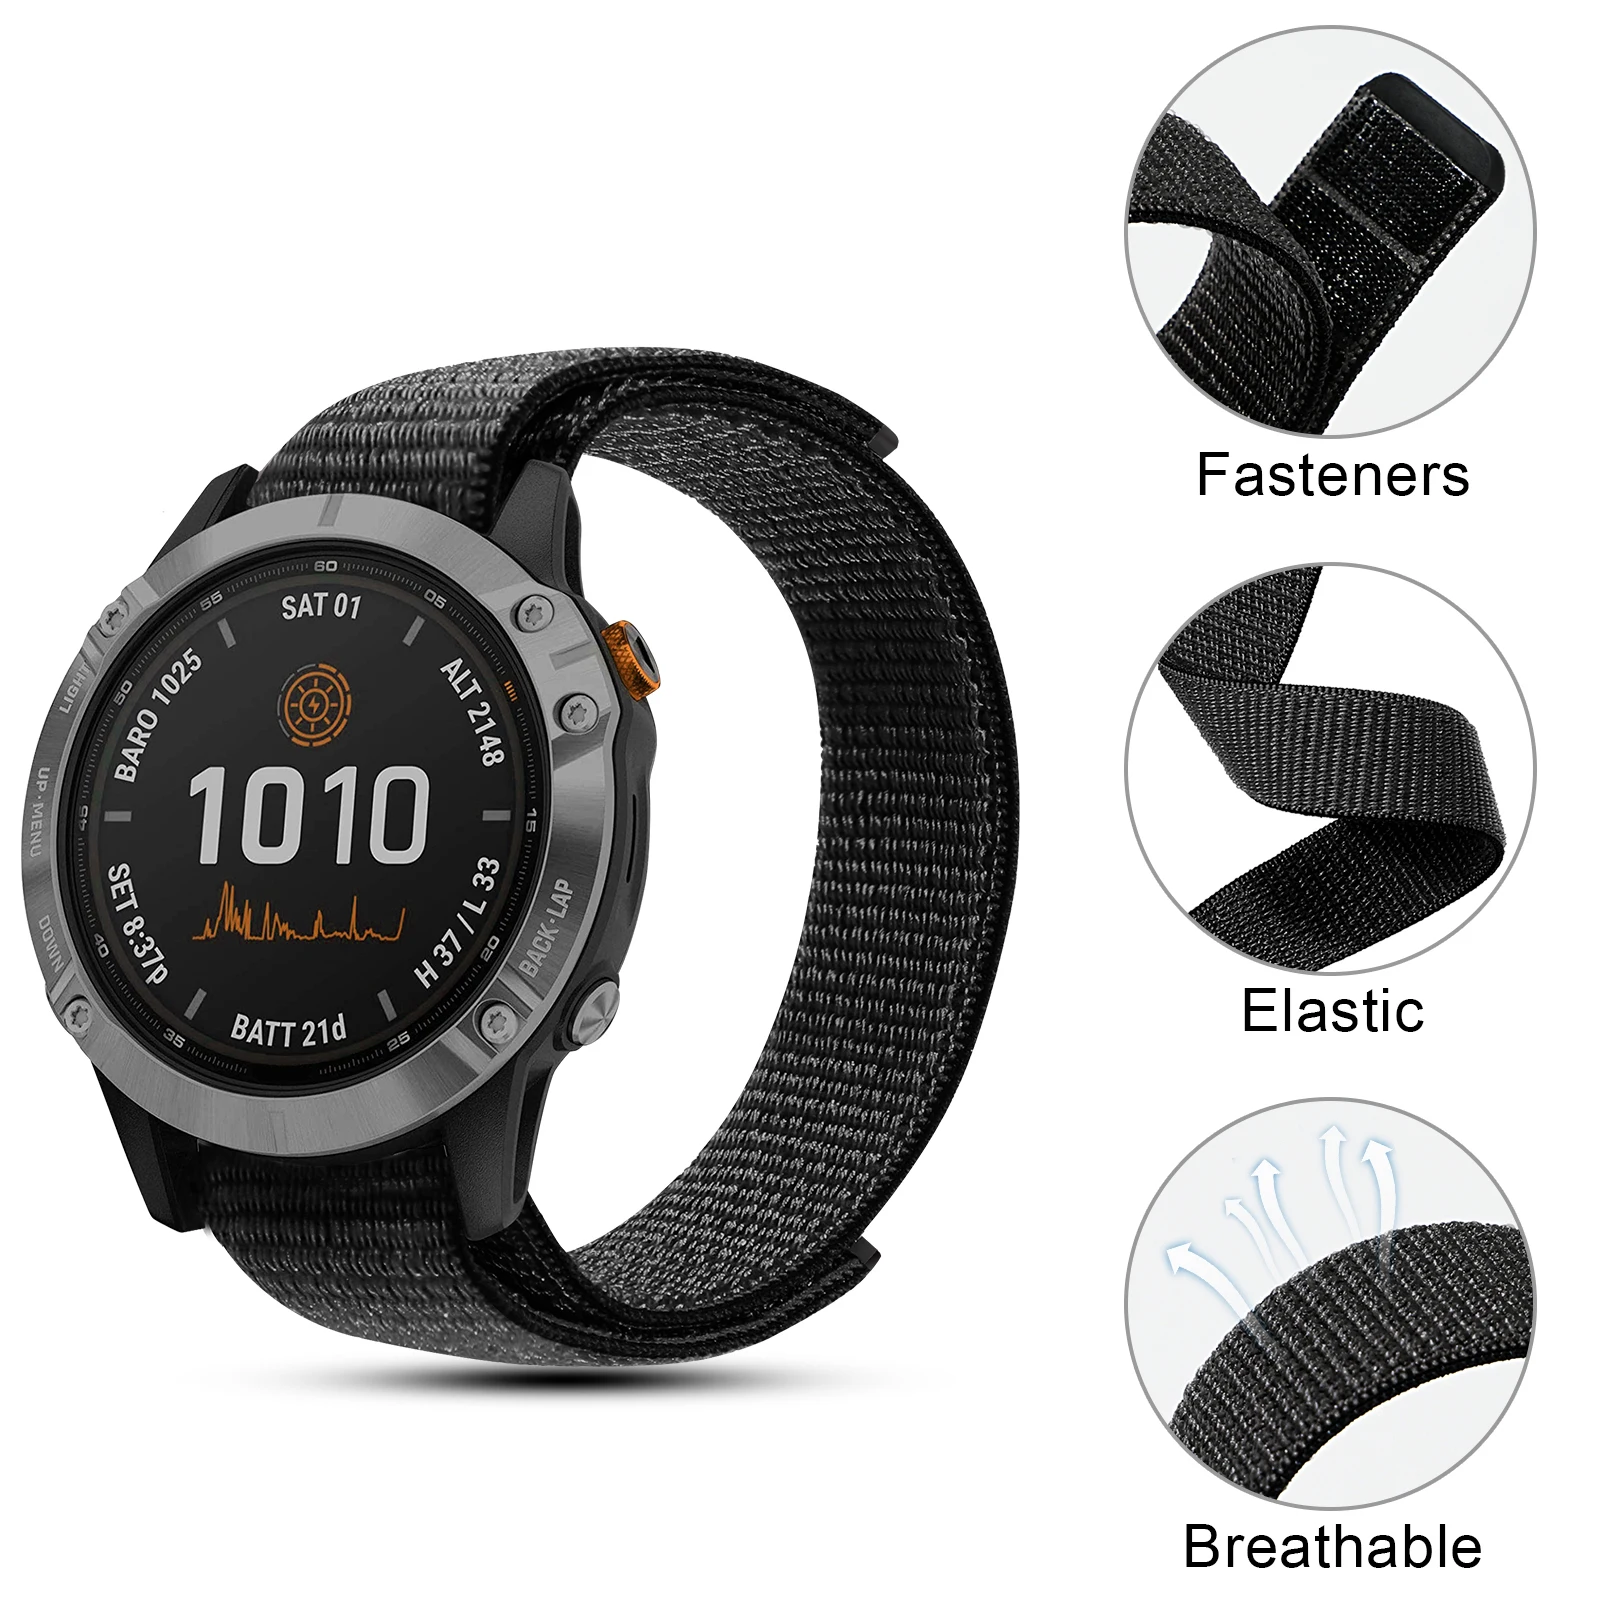 

22mm 20mm Nylon Strap For Garmin Fenix 6 5 6S 5S Pro Plus/Forerunner 935 945 Bracelet Hook and Loop Quick Dry Watch Band Correa